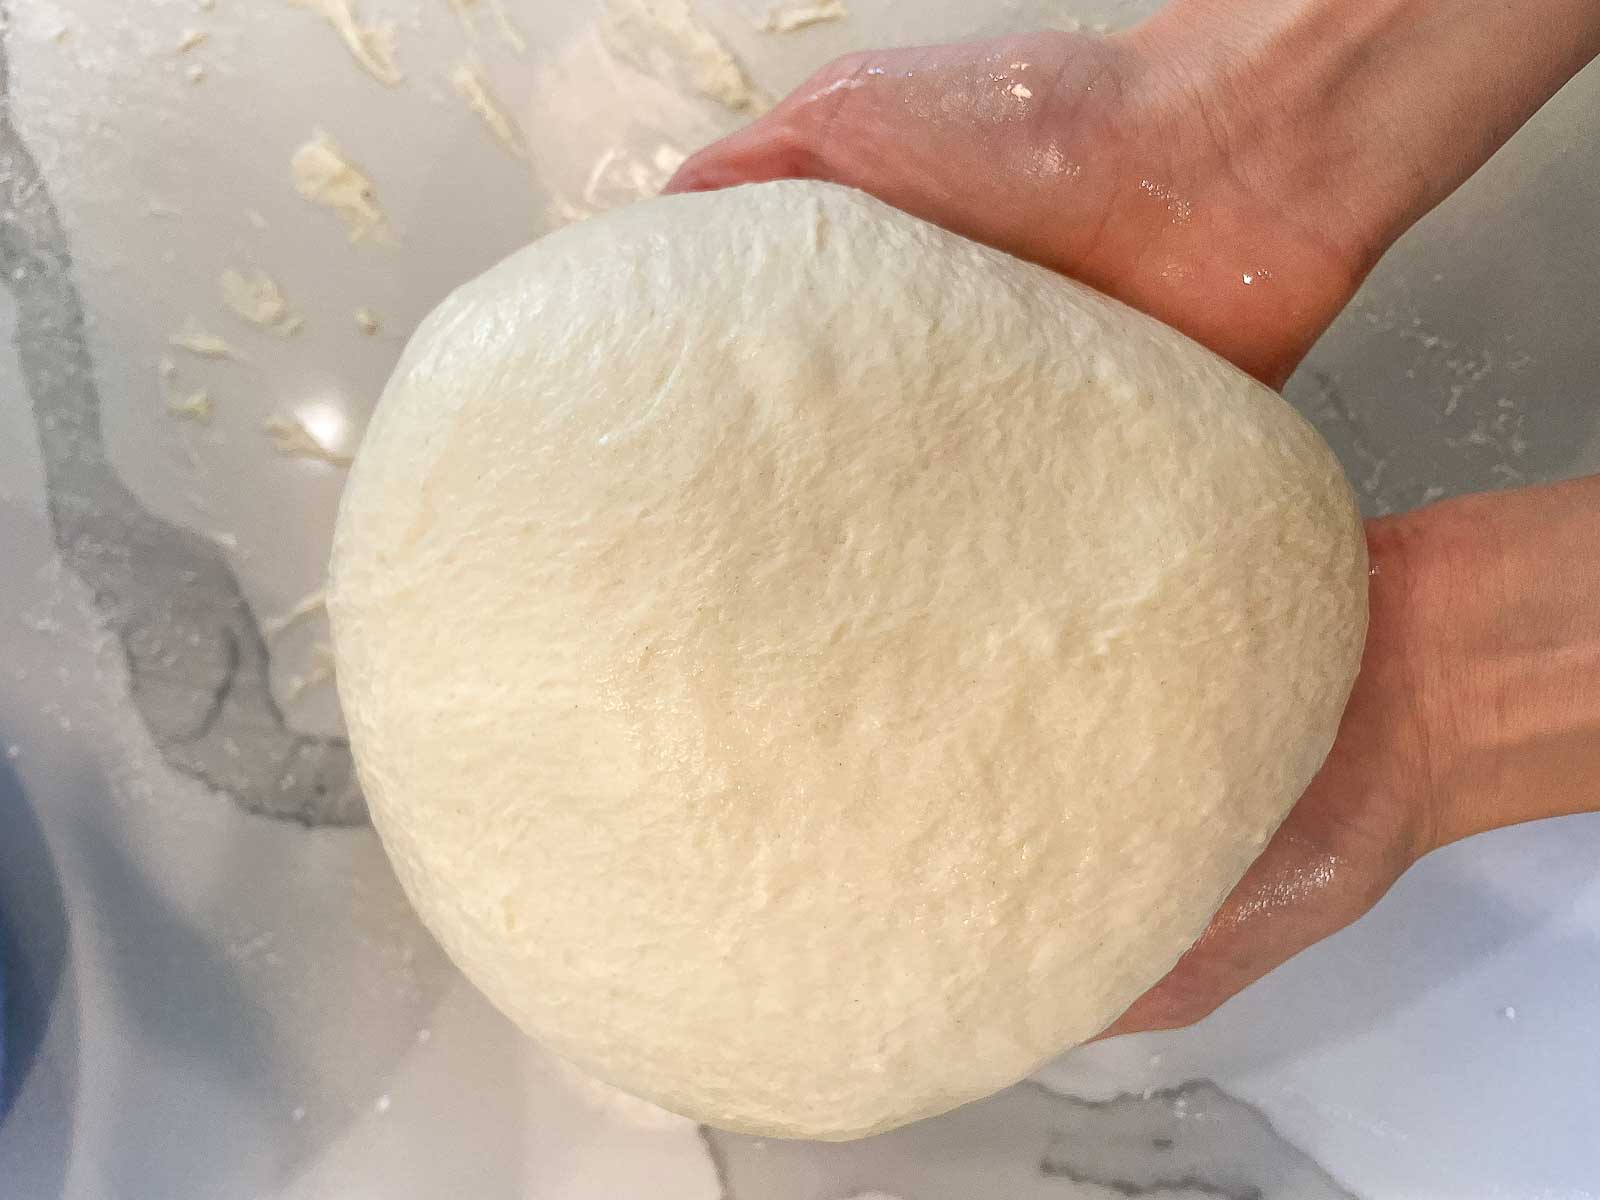 Round pizza dough being held in two hands on a light background.